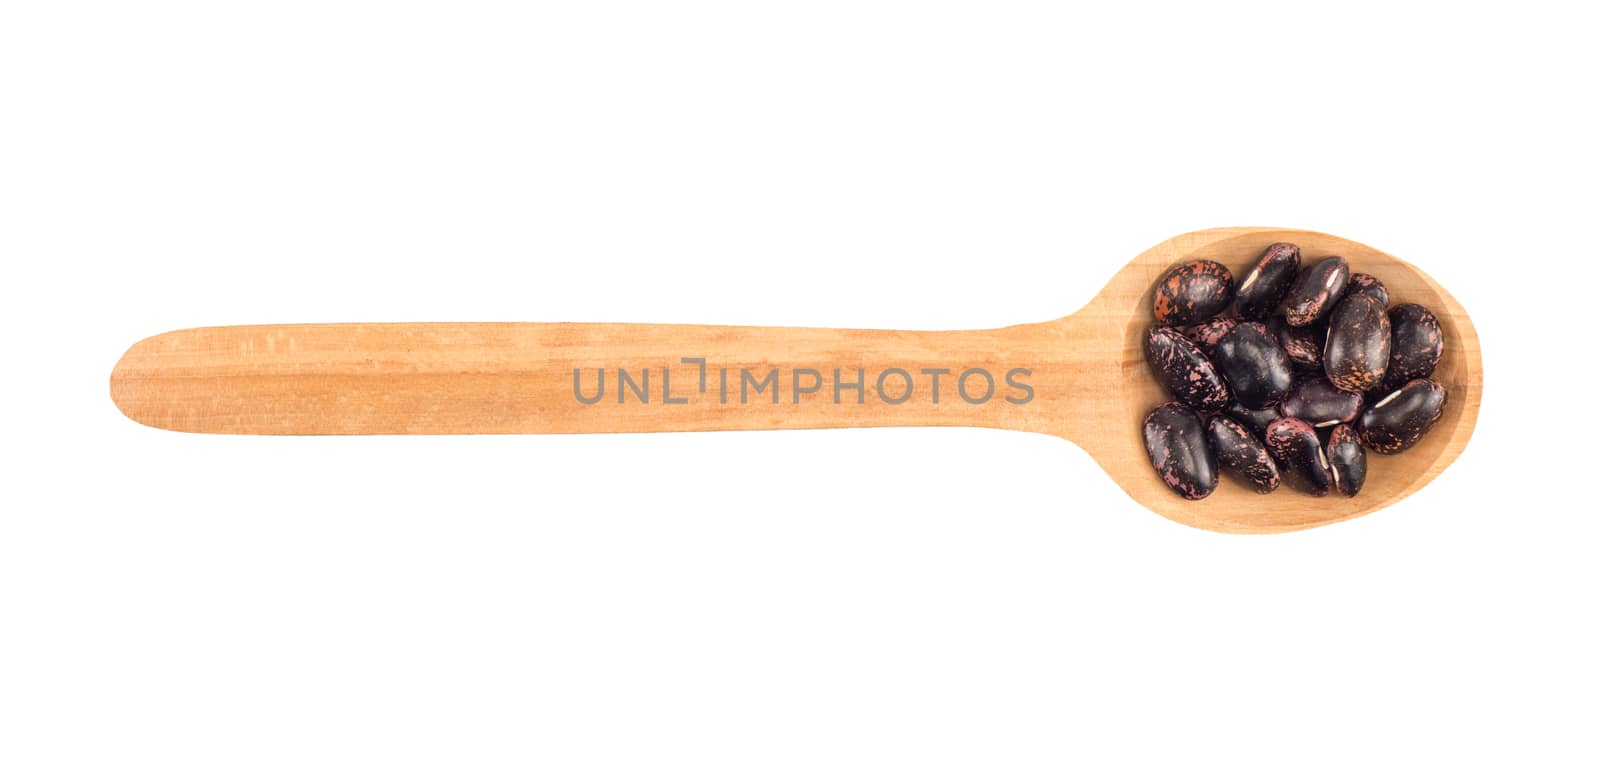 kidney beans on a wooden spoon isolated on white background by DGolbay